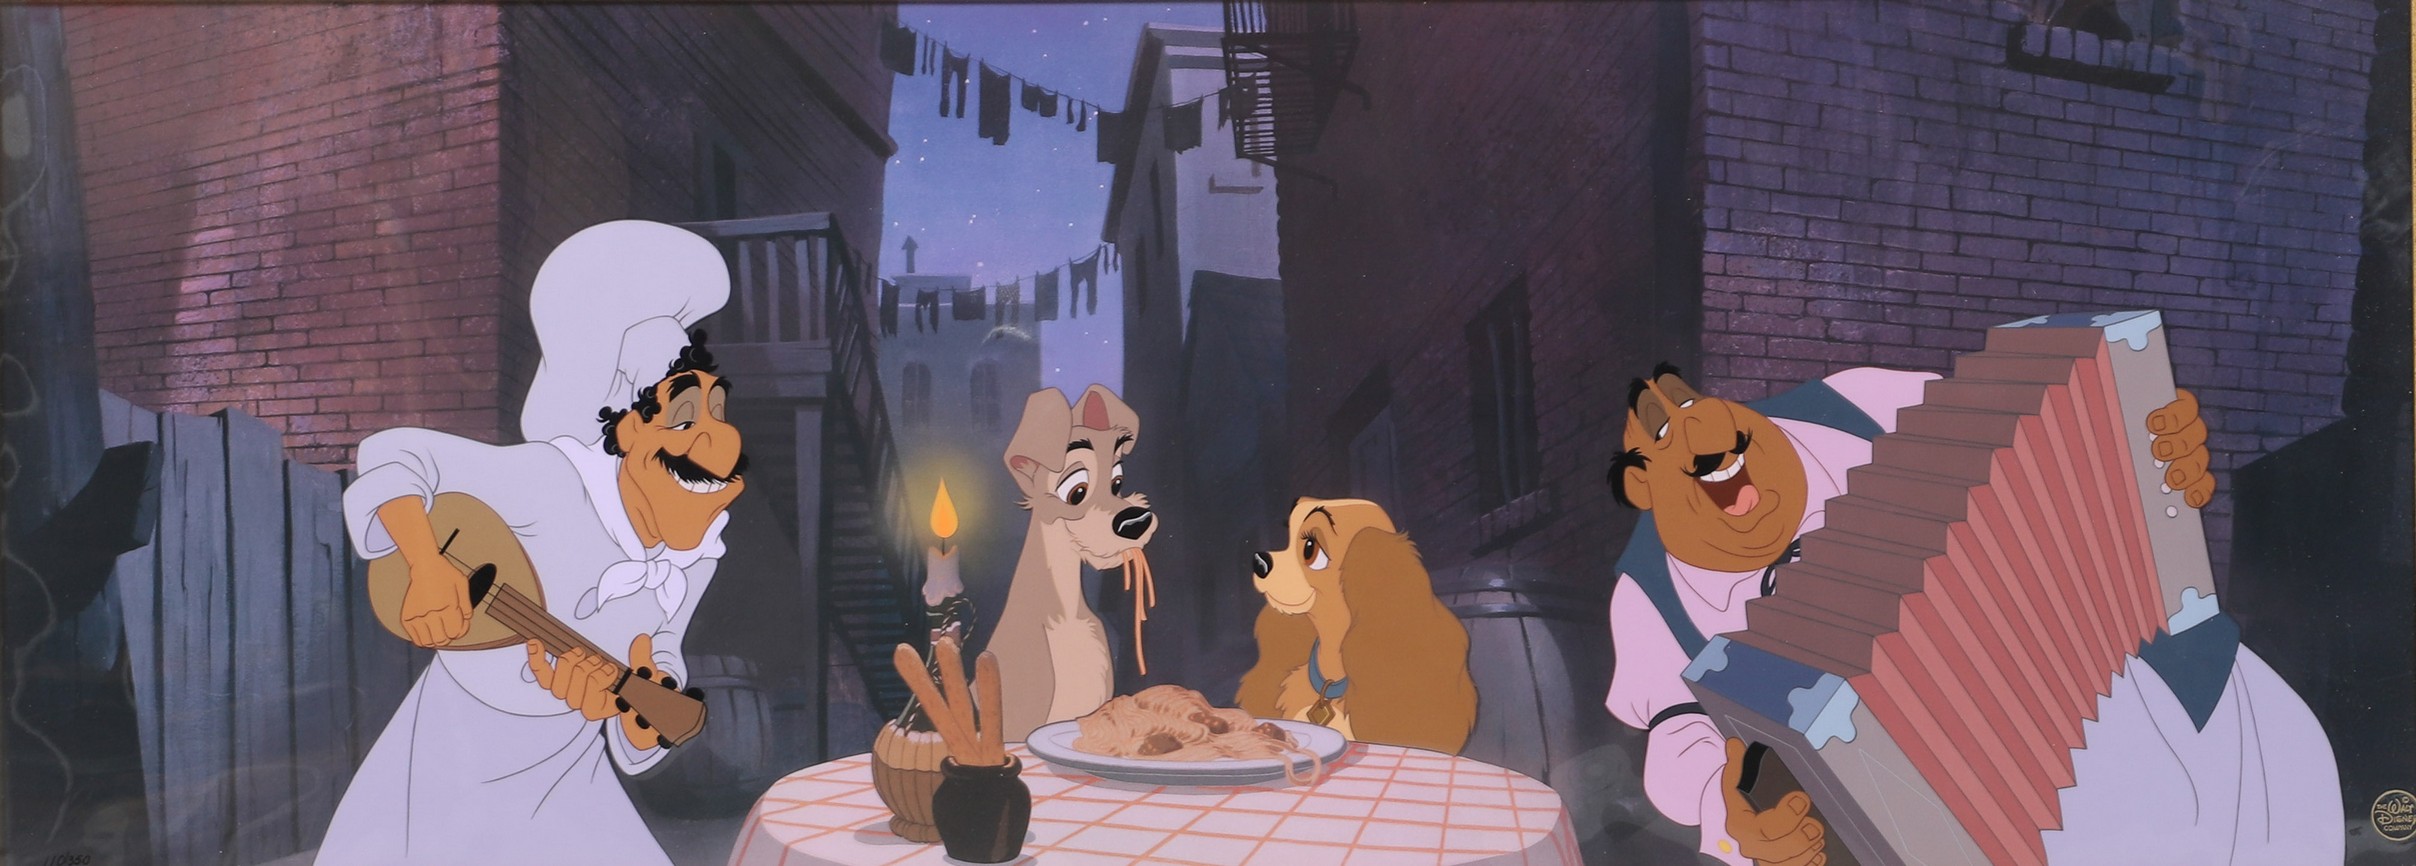 Lady the Tramp hand painted cel 2e1788